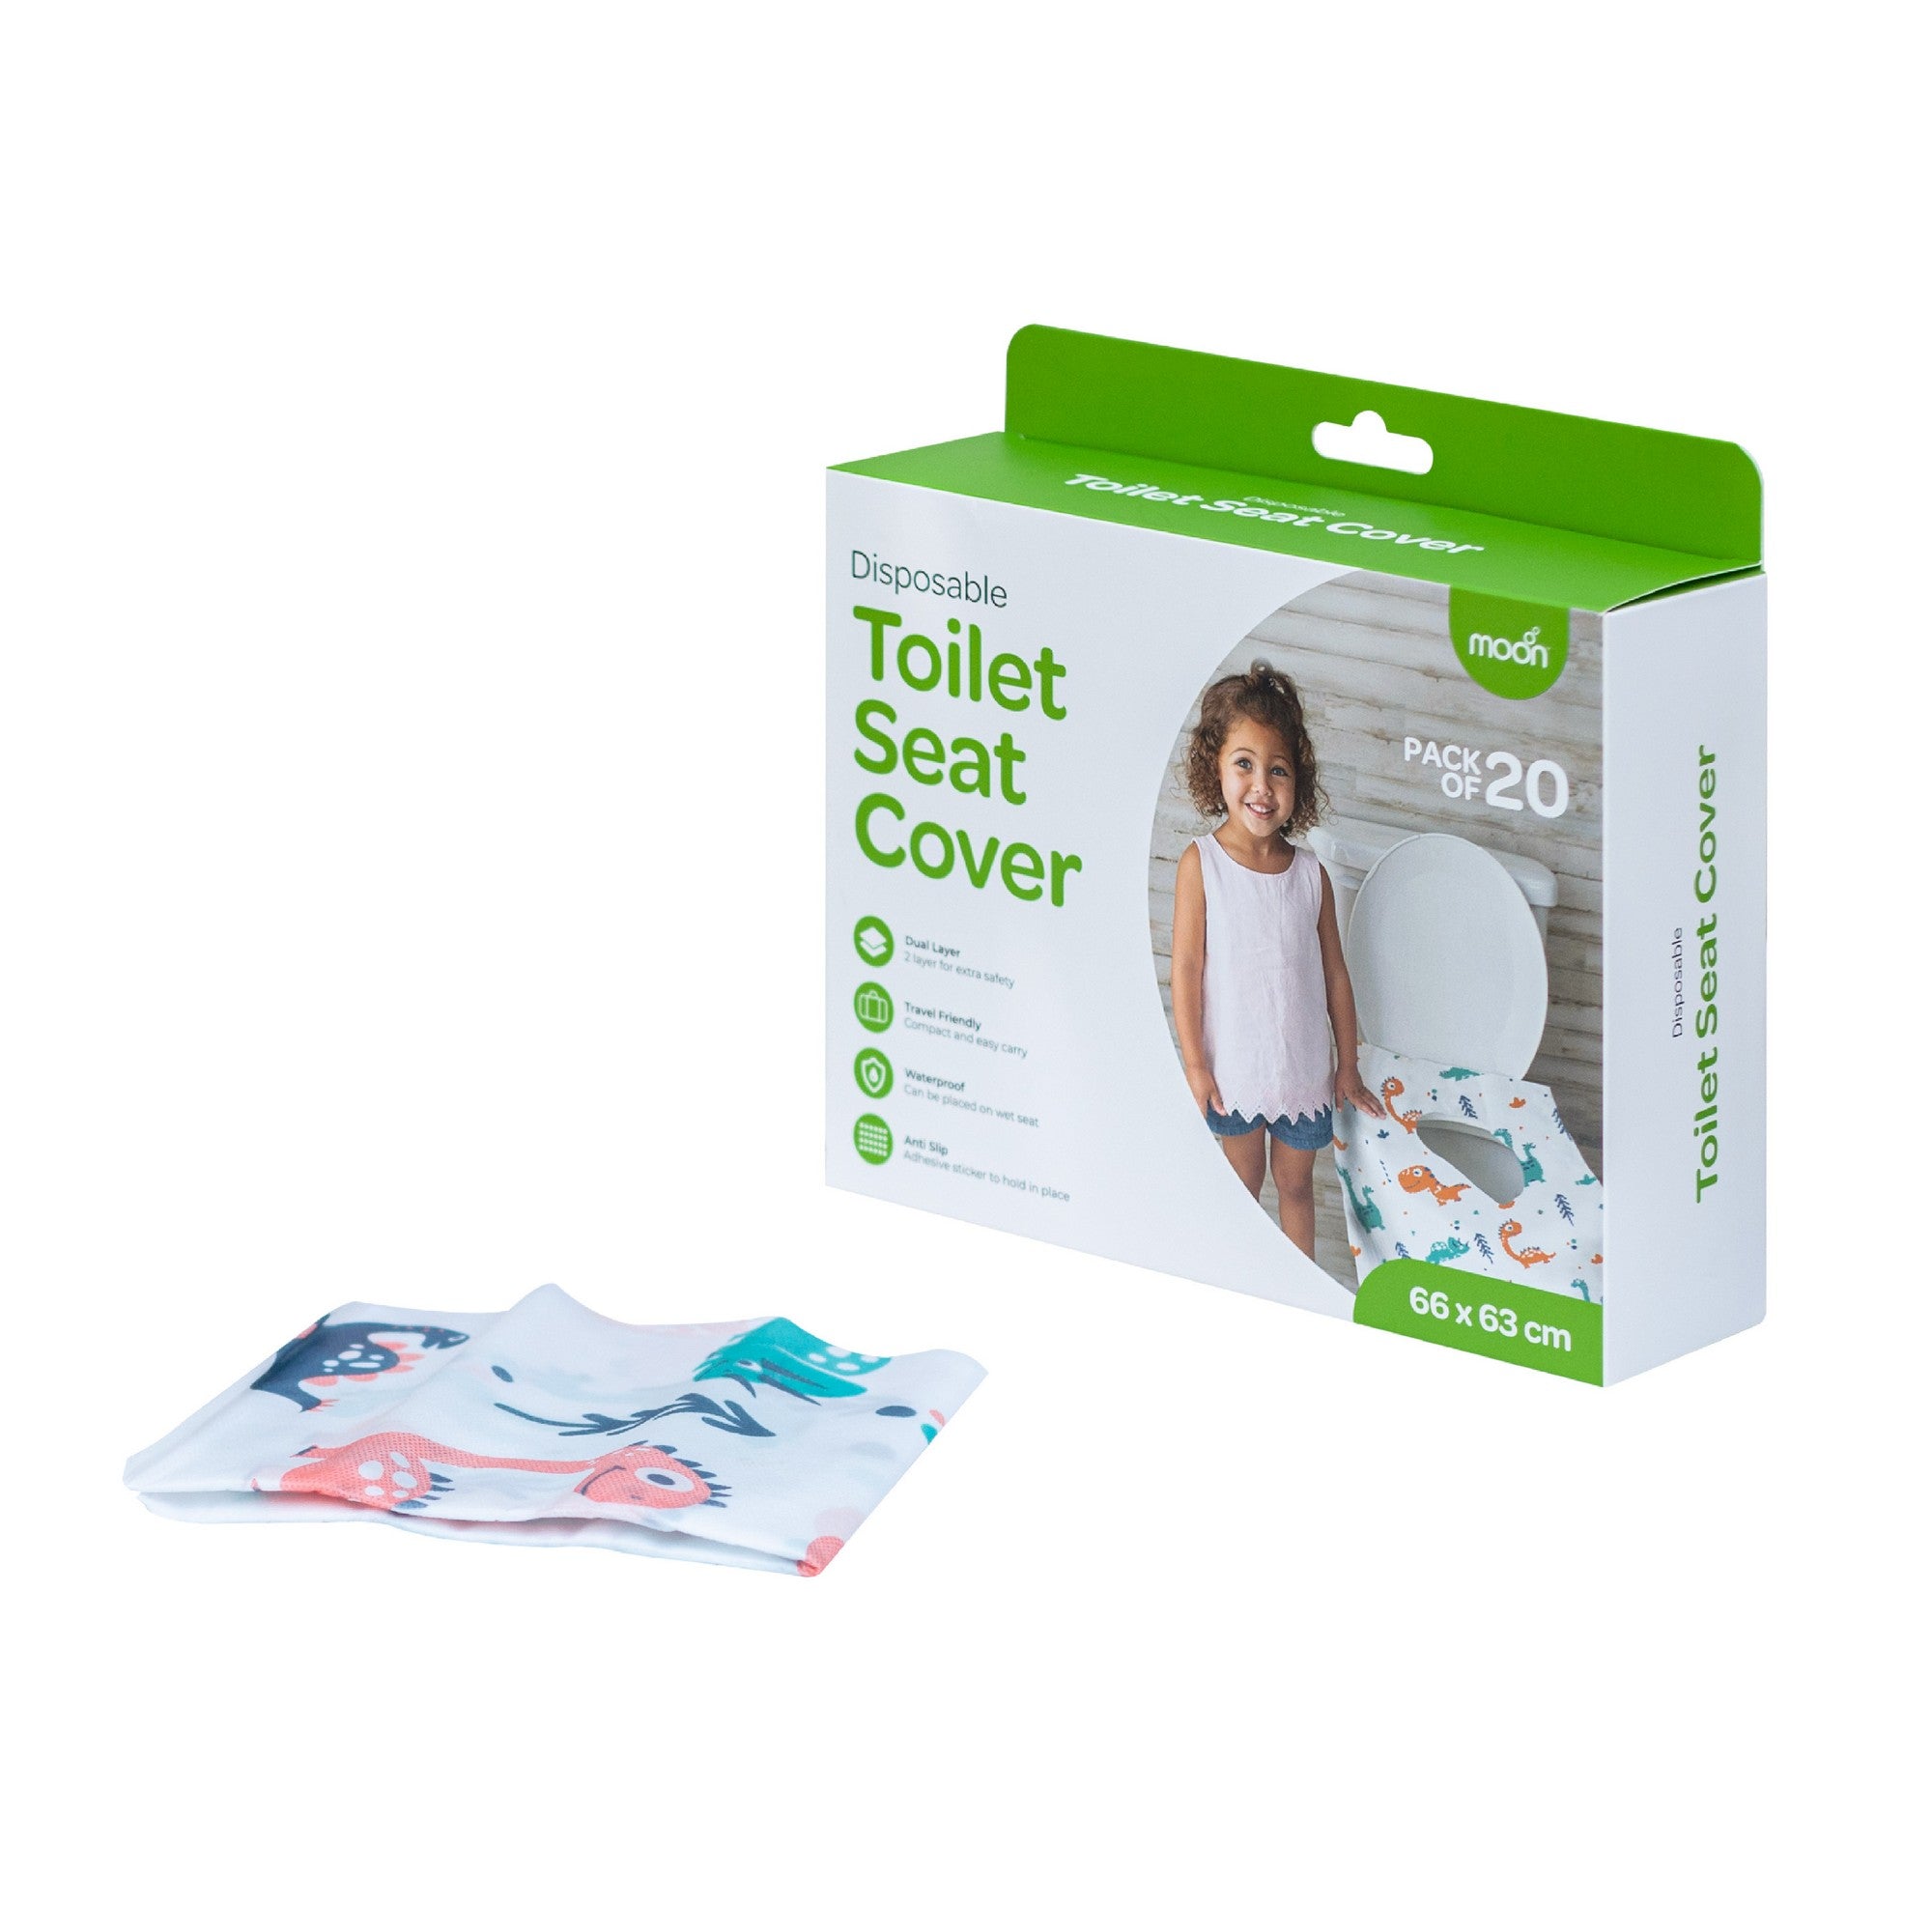 Moon Disposable toilet seat cover Potty Training Multicolor 6 to 36 Months